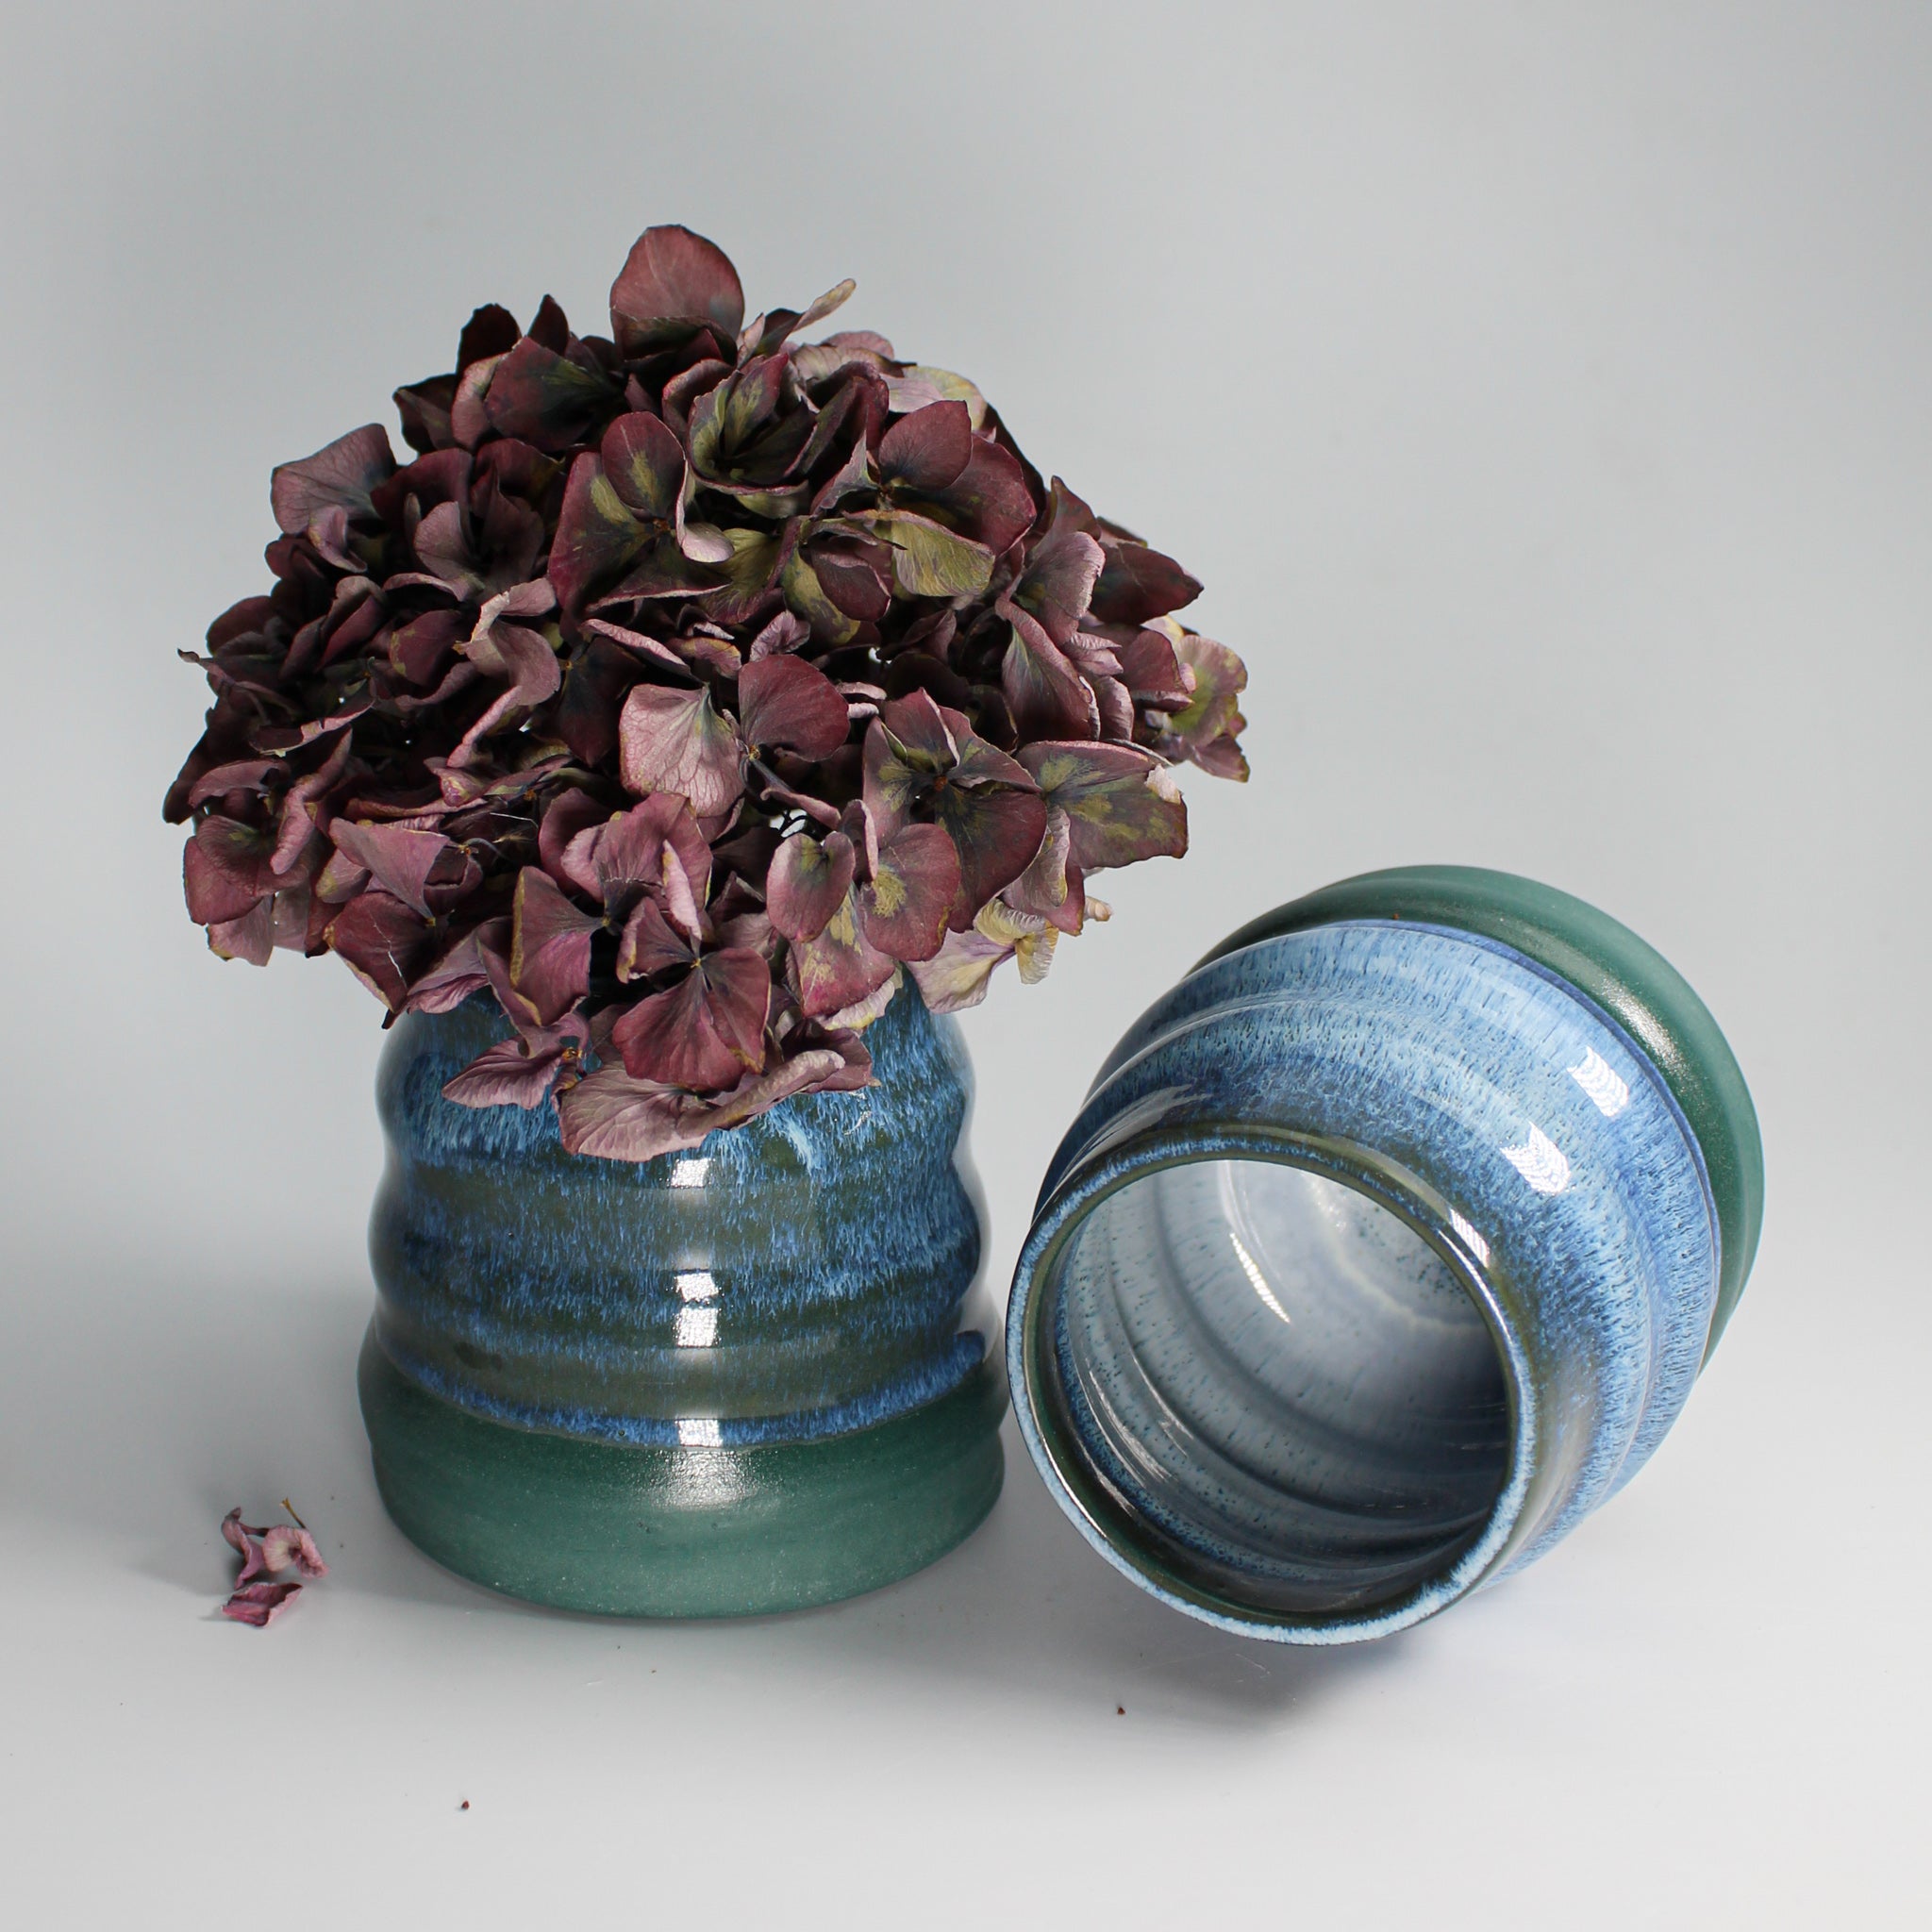 Pair of blue and green mini wobble vases in pottery. One has dried flowers in and the other is lying on its side. 